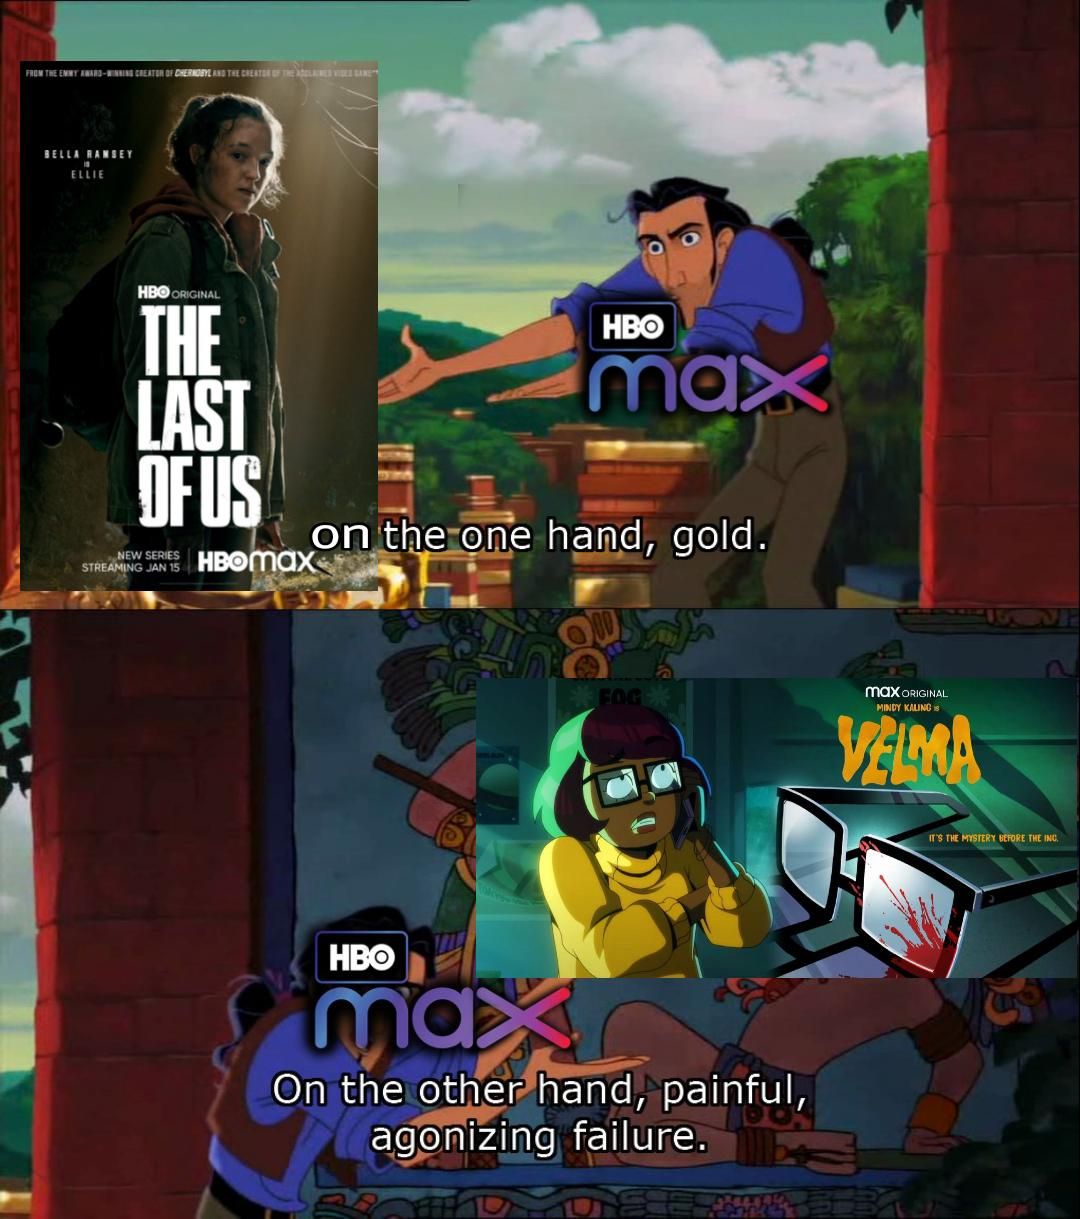 The duality if HBO max